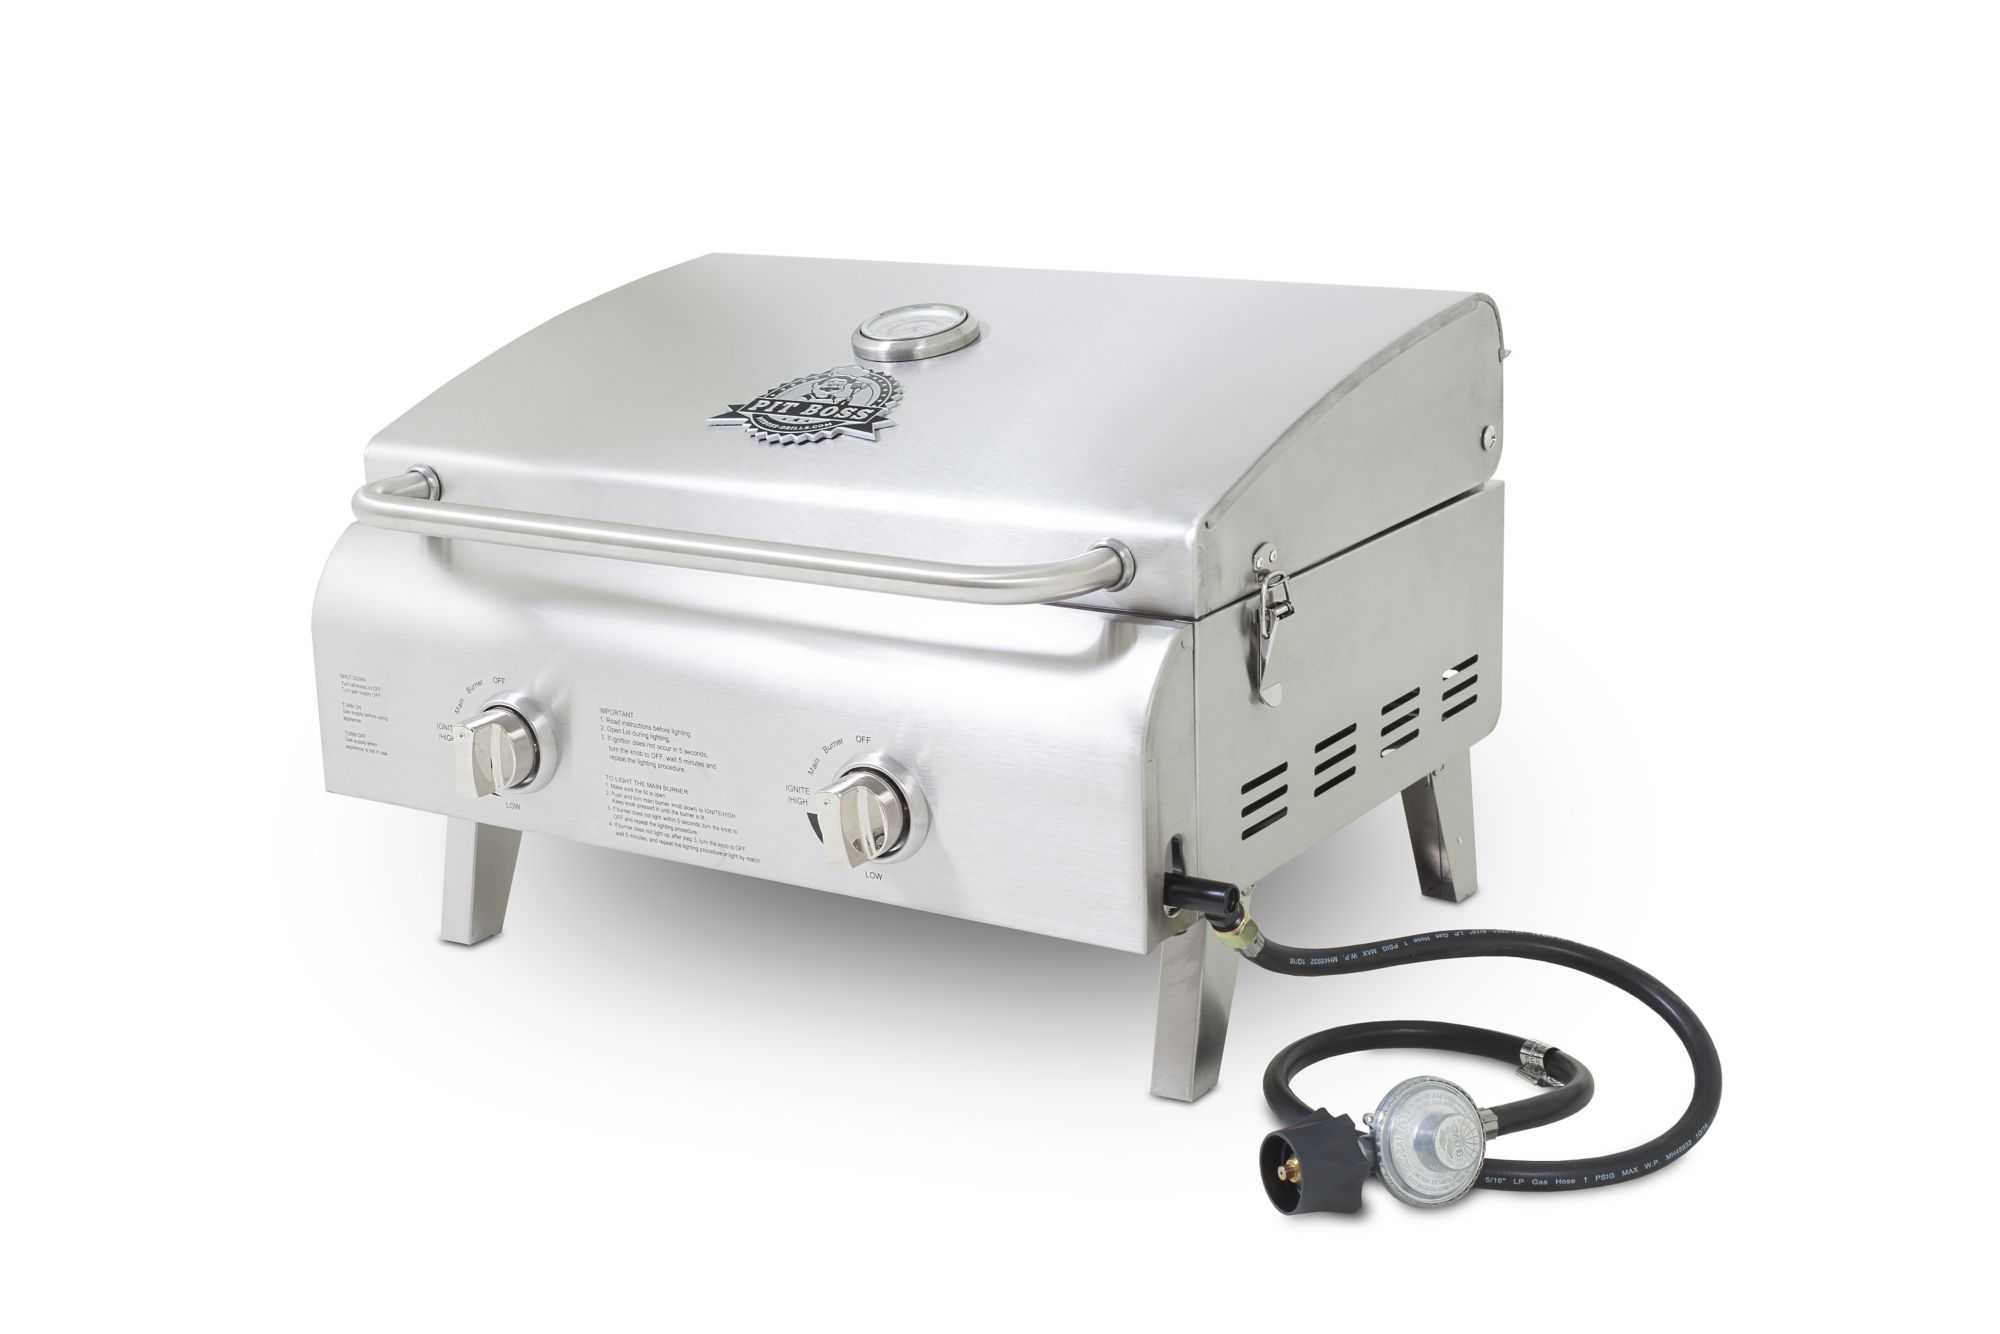 Pit Boss Tabletop Griddle Review: One and Two Burner Options